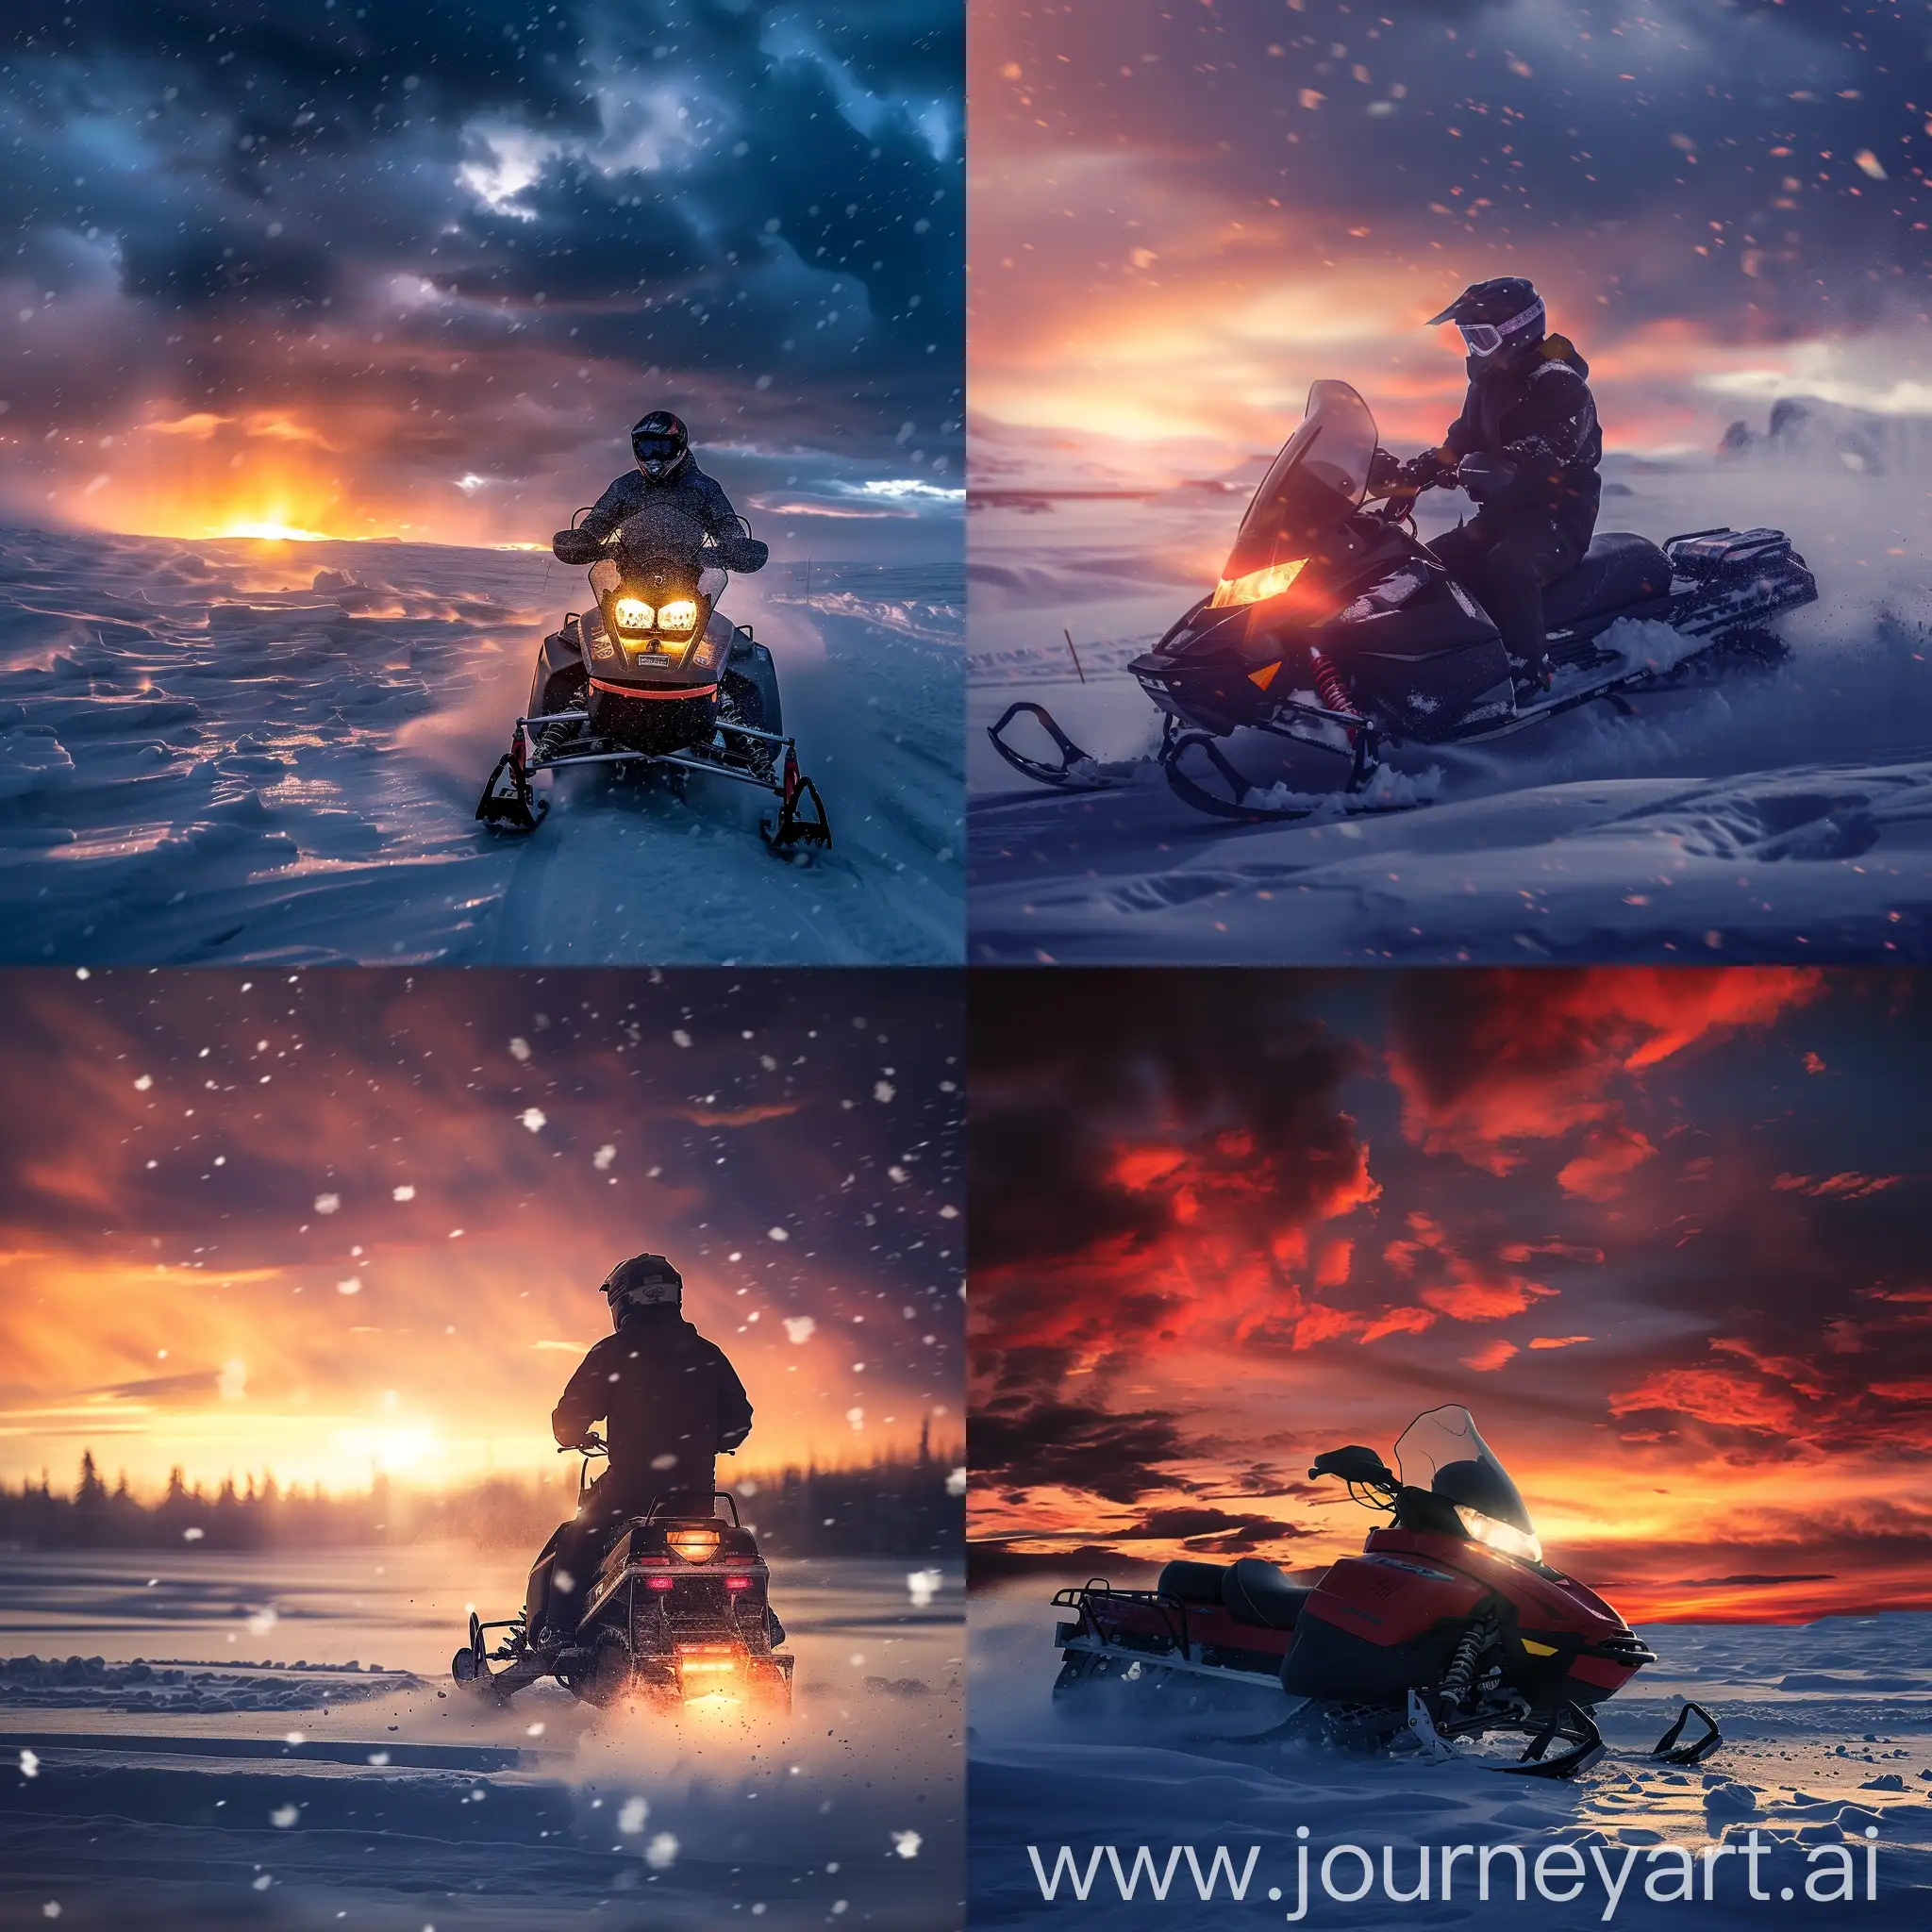 Winter-Adventure-Snowmobile-Riding-in-a-Stormy-Sunset